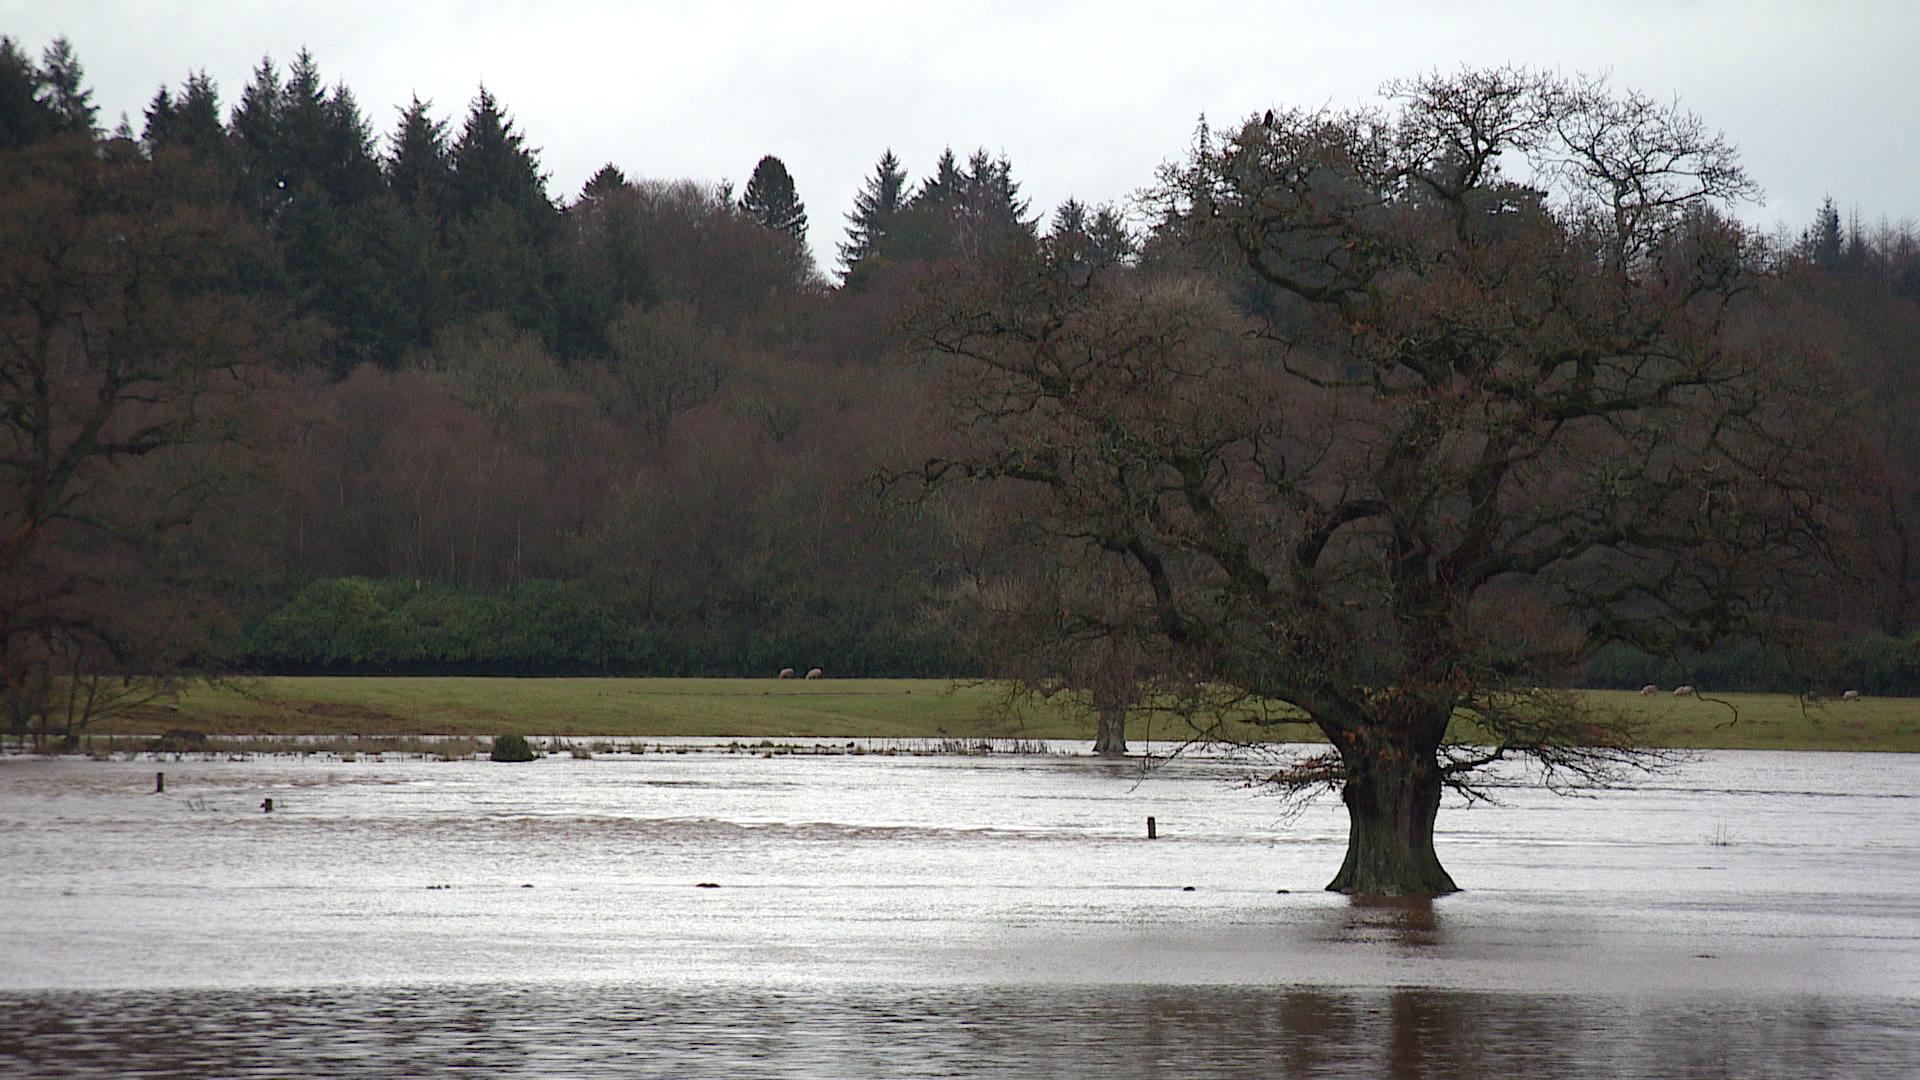 Concerns climate change will mean 'flooding will be more frequent'